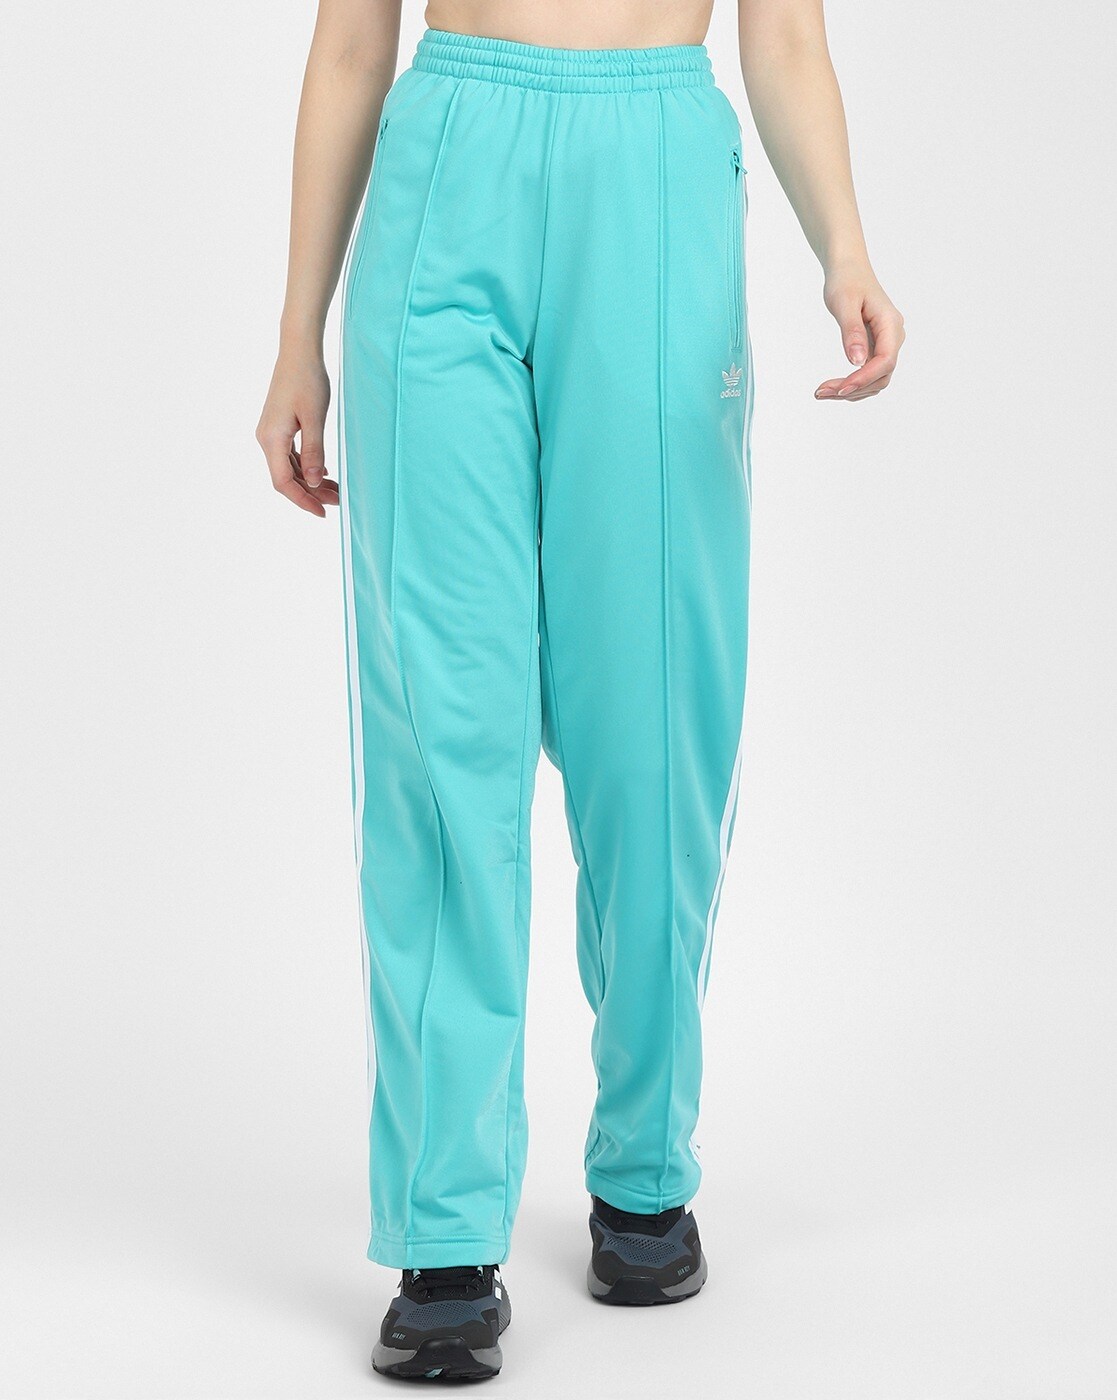 Buy Turquoise Blue Track Pants for Women by Adidas Originals Online   Ajiocom